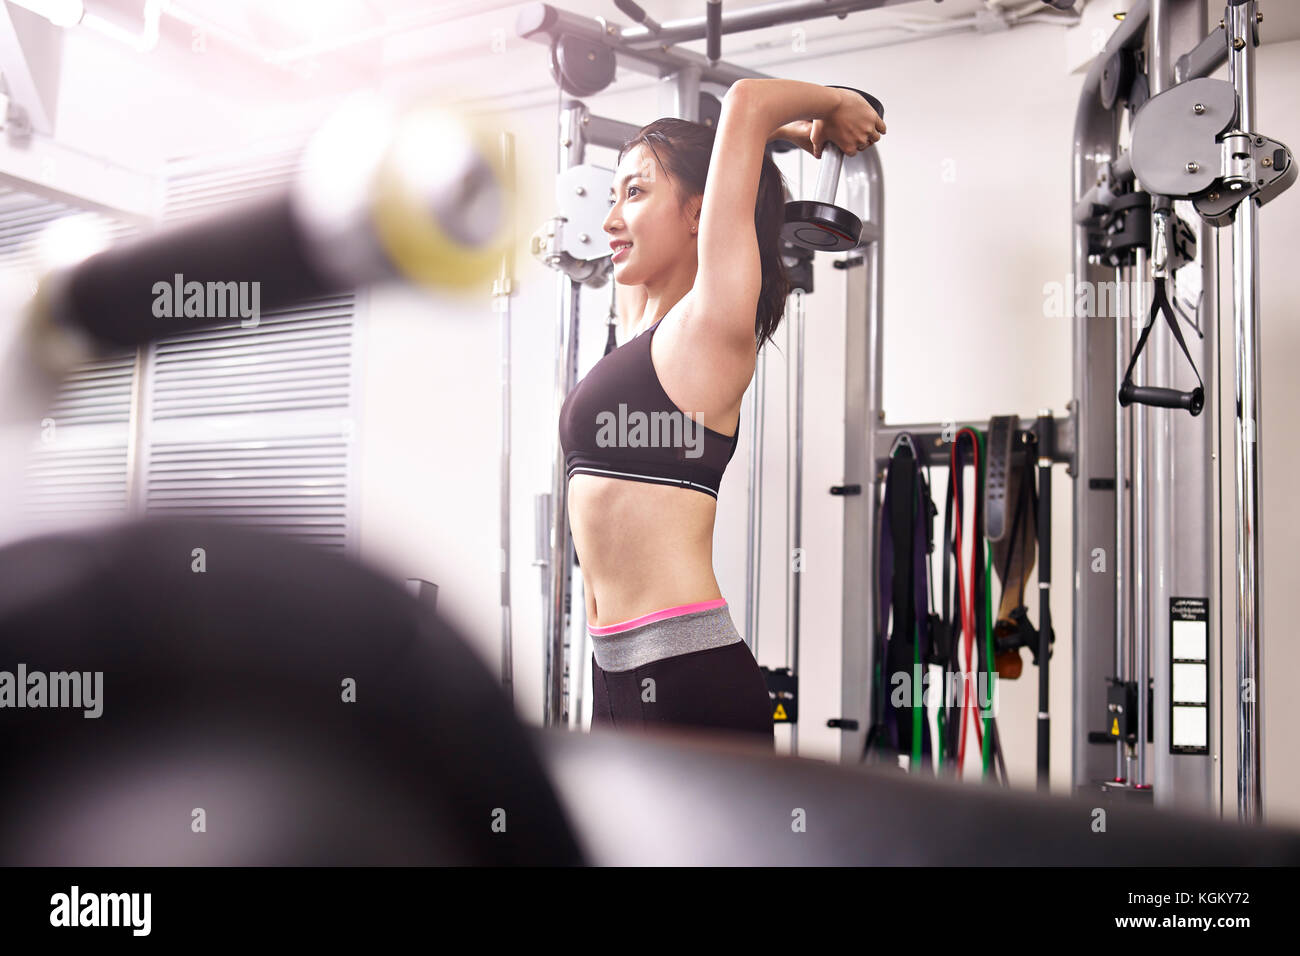 young asian woman working out in gym using dumbbell. Stock Photo